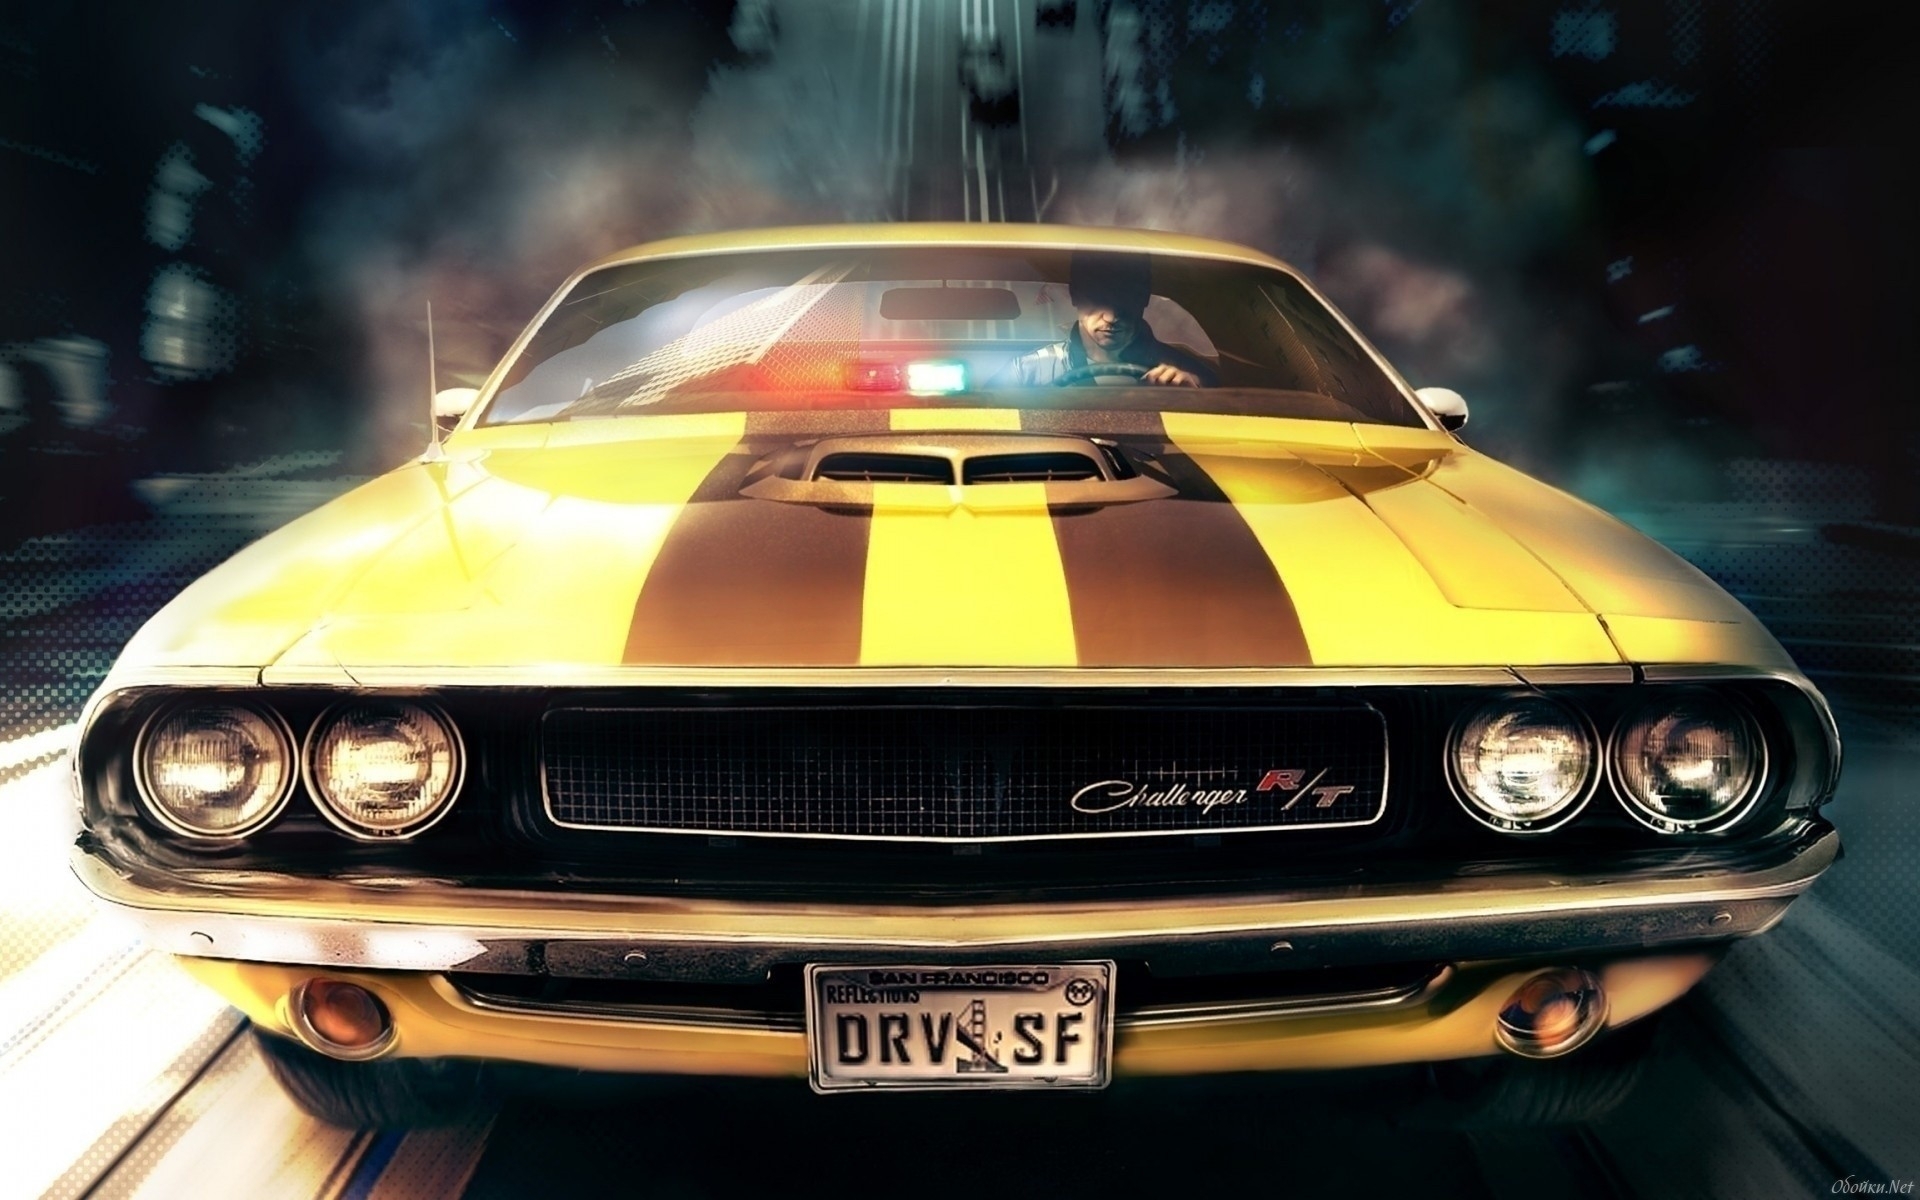 10 Top American Muscle Cars Wallpapers FULL HD 1920×1080 For PC Background